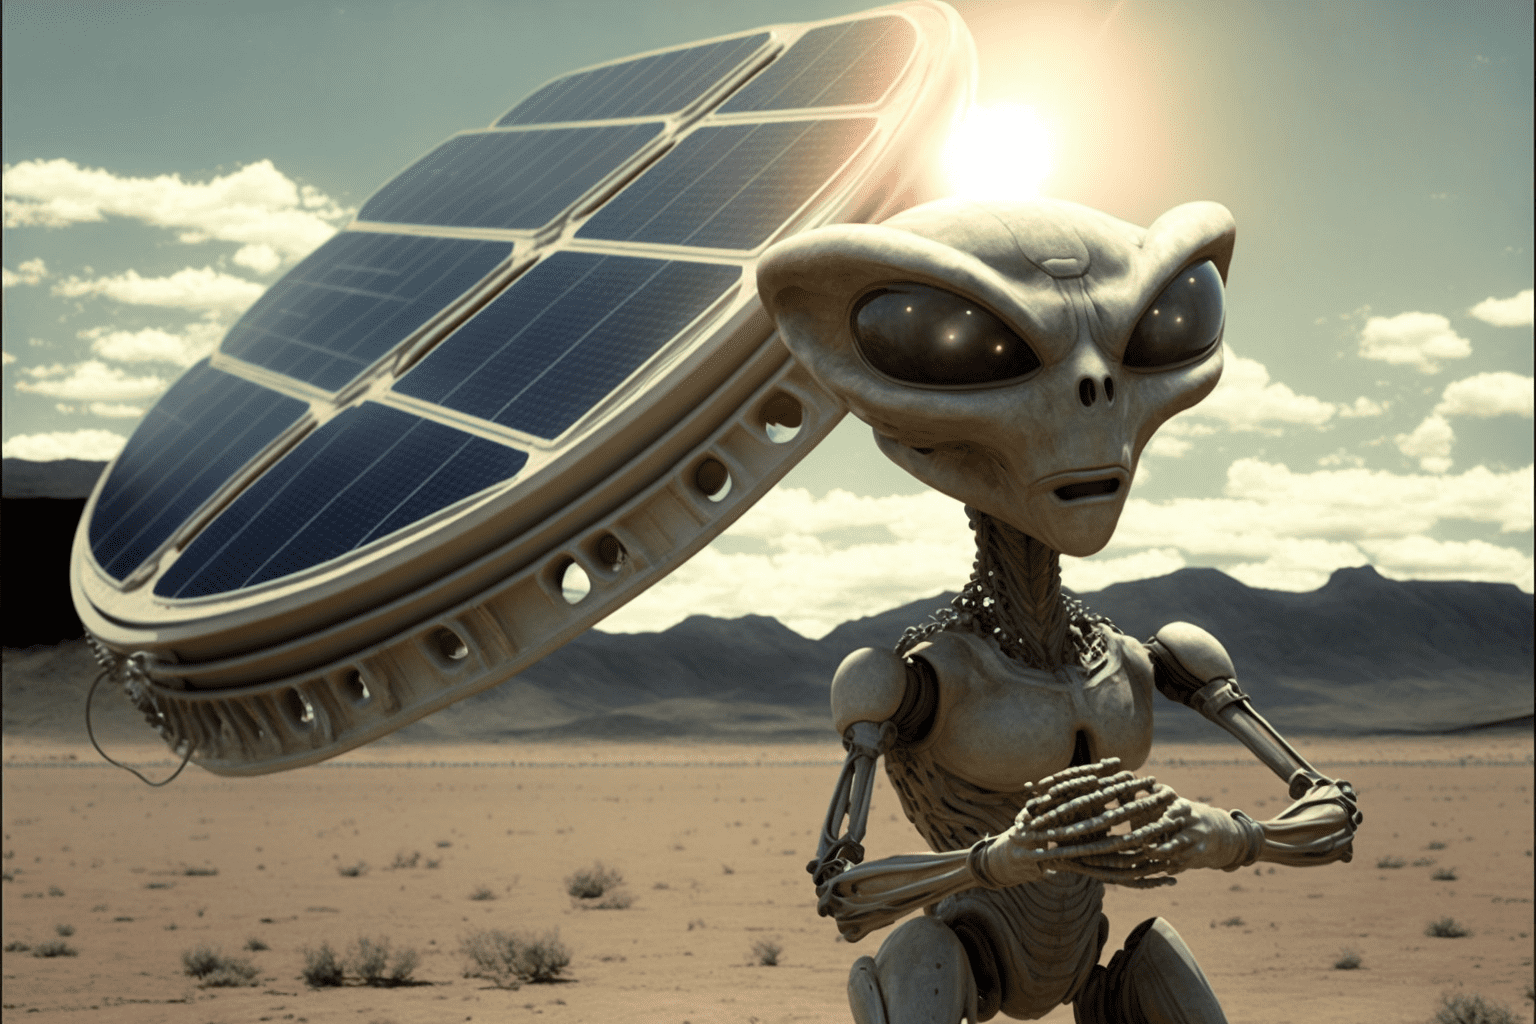 Are Alien Spacecraft Using Solar Energy to Power Us?